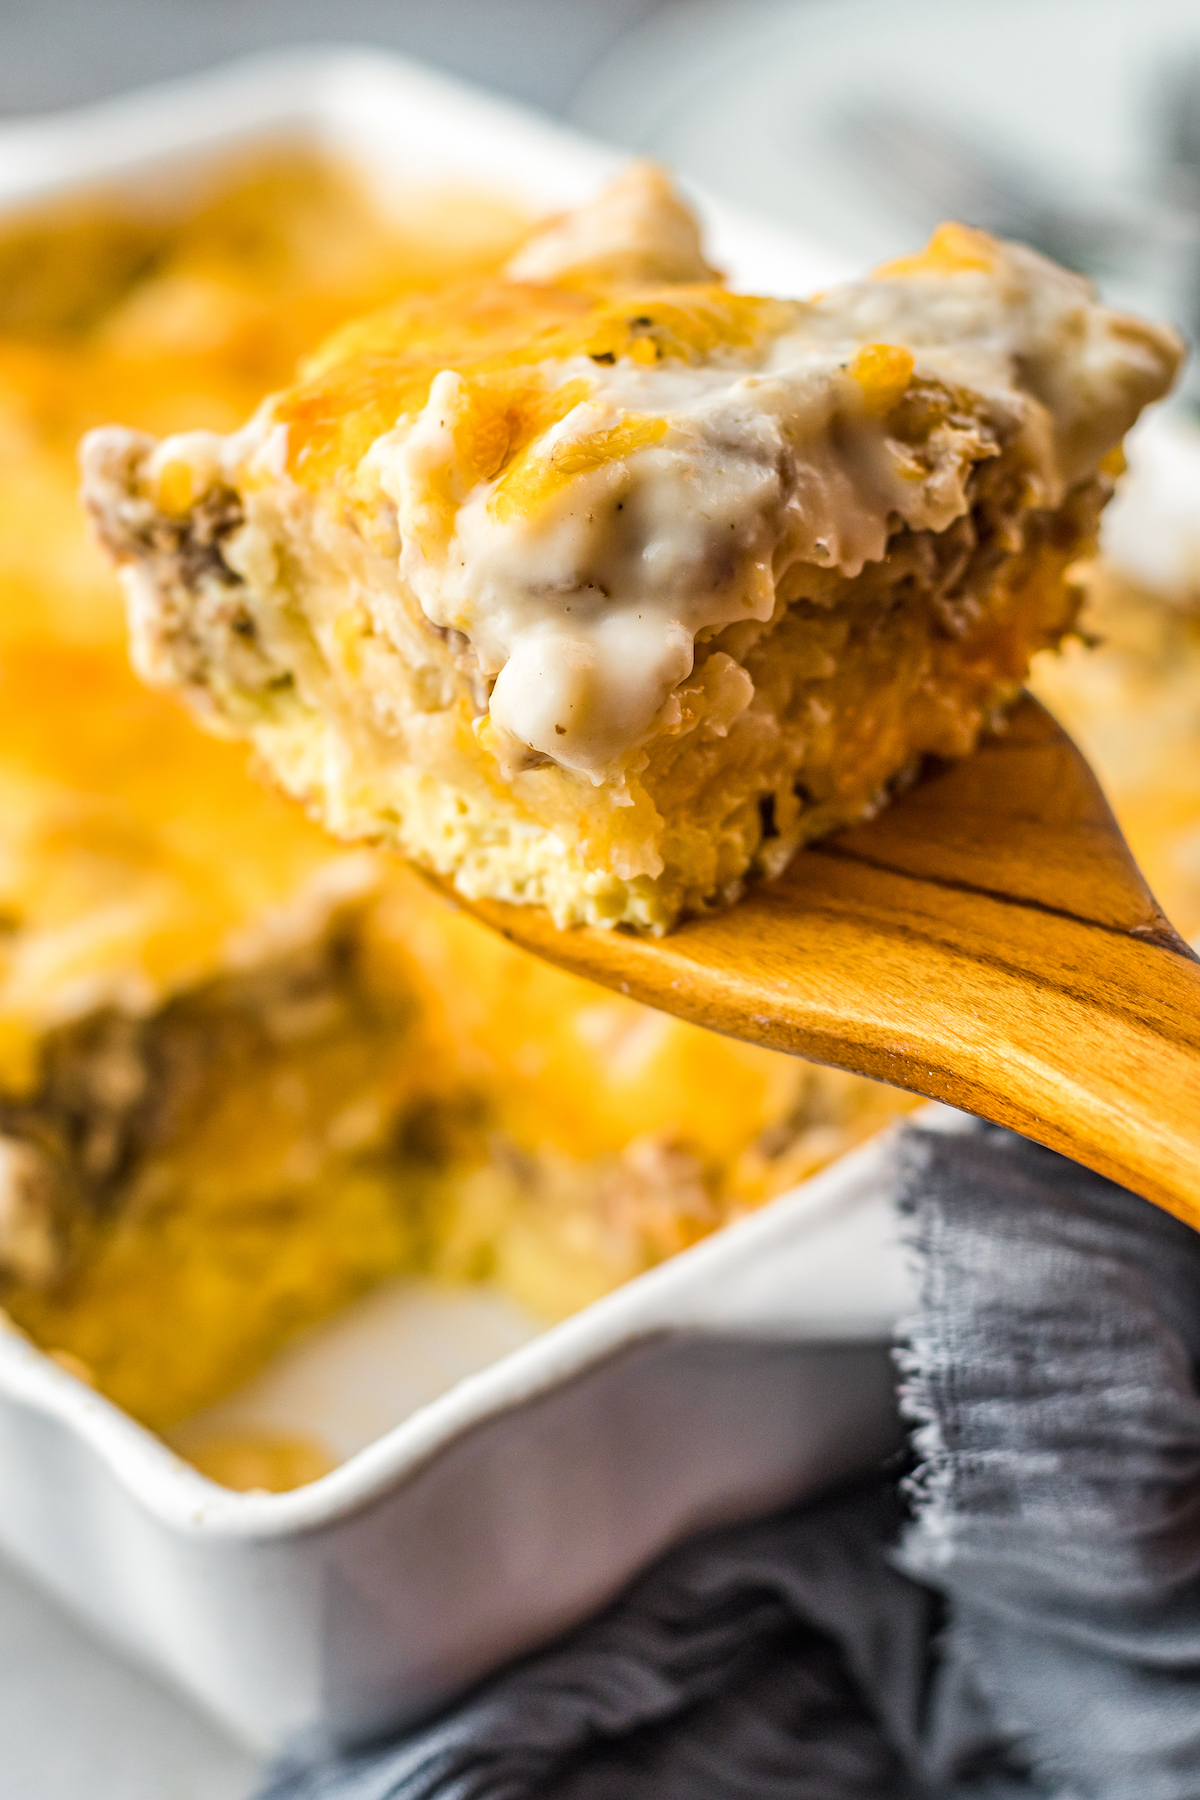 A serving of biscuits and gravy casserole on a wooden spoon being lifted from the breakfast casserole dish.